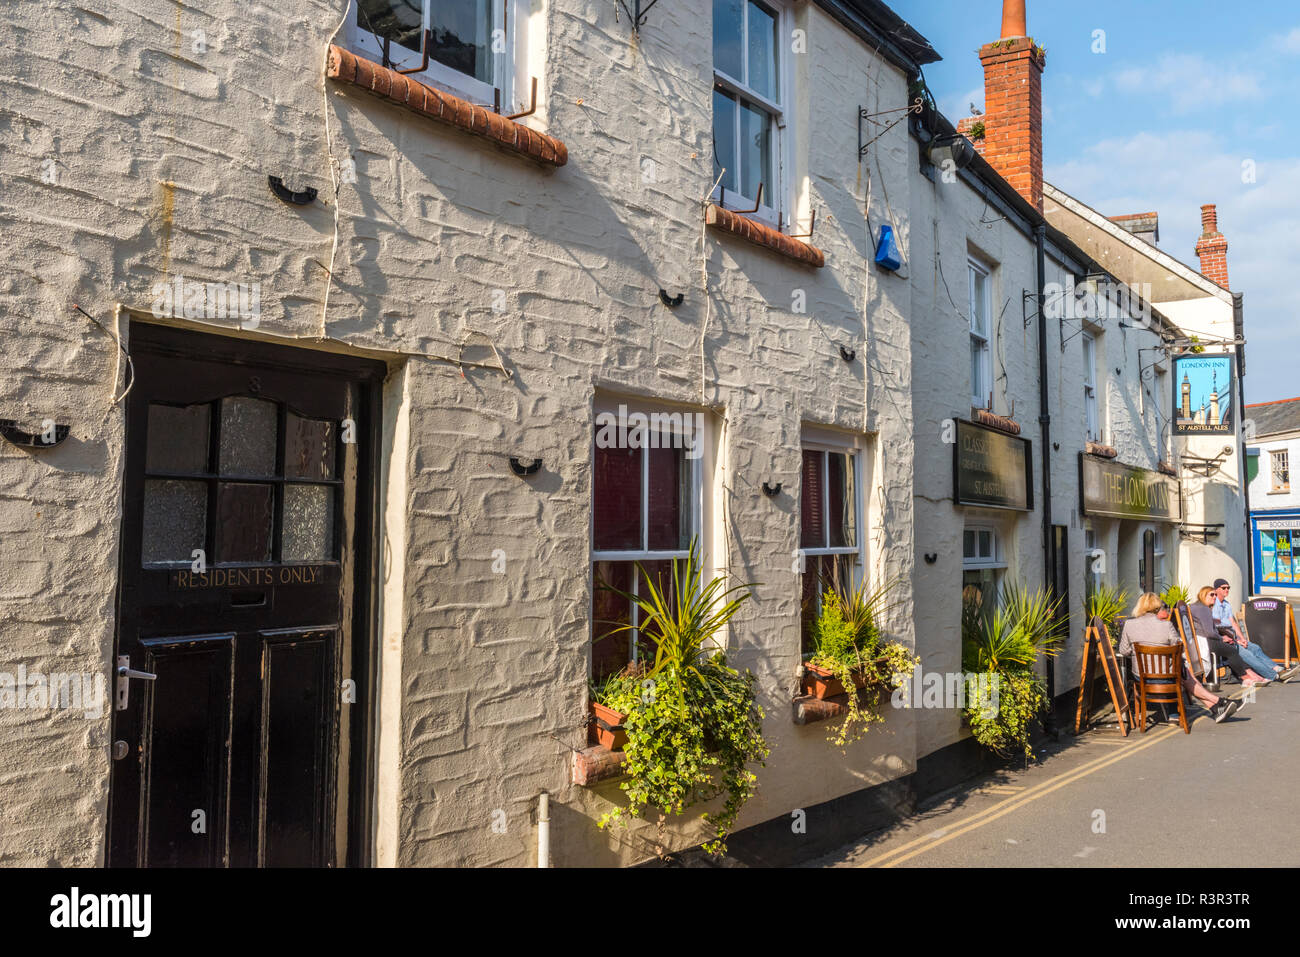 The London Inn is a traditional English pub on Lanadwell Street in Padstow, Cornwall, England Stock Photo